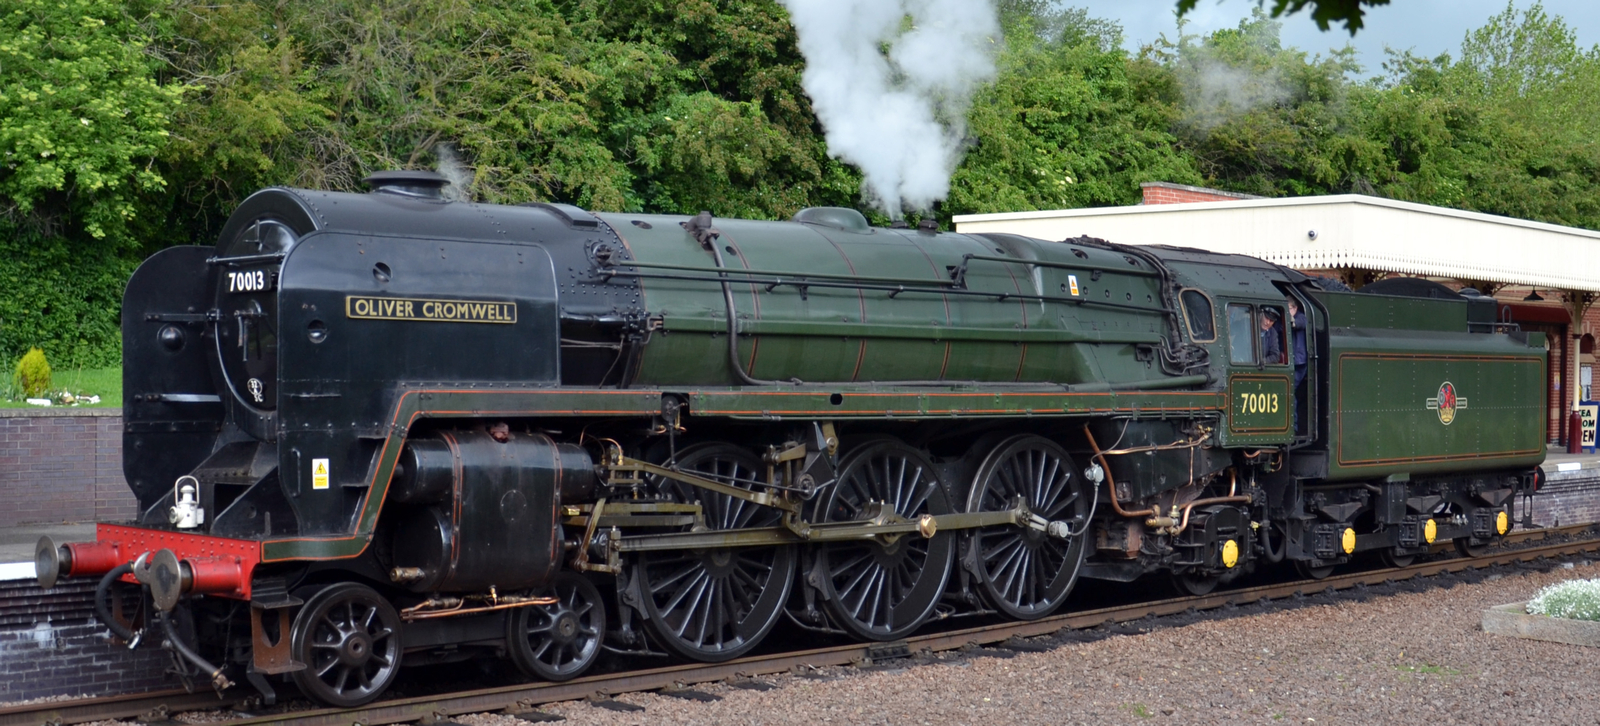 No 70013 “Oliver Cromwell” at Leicester North Station in June 2013